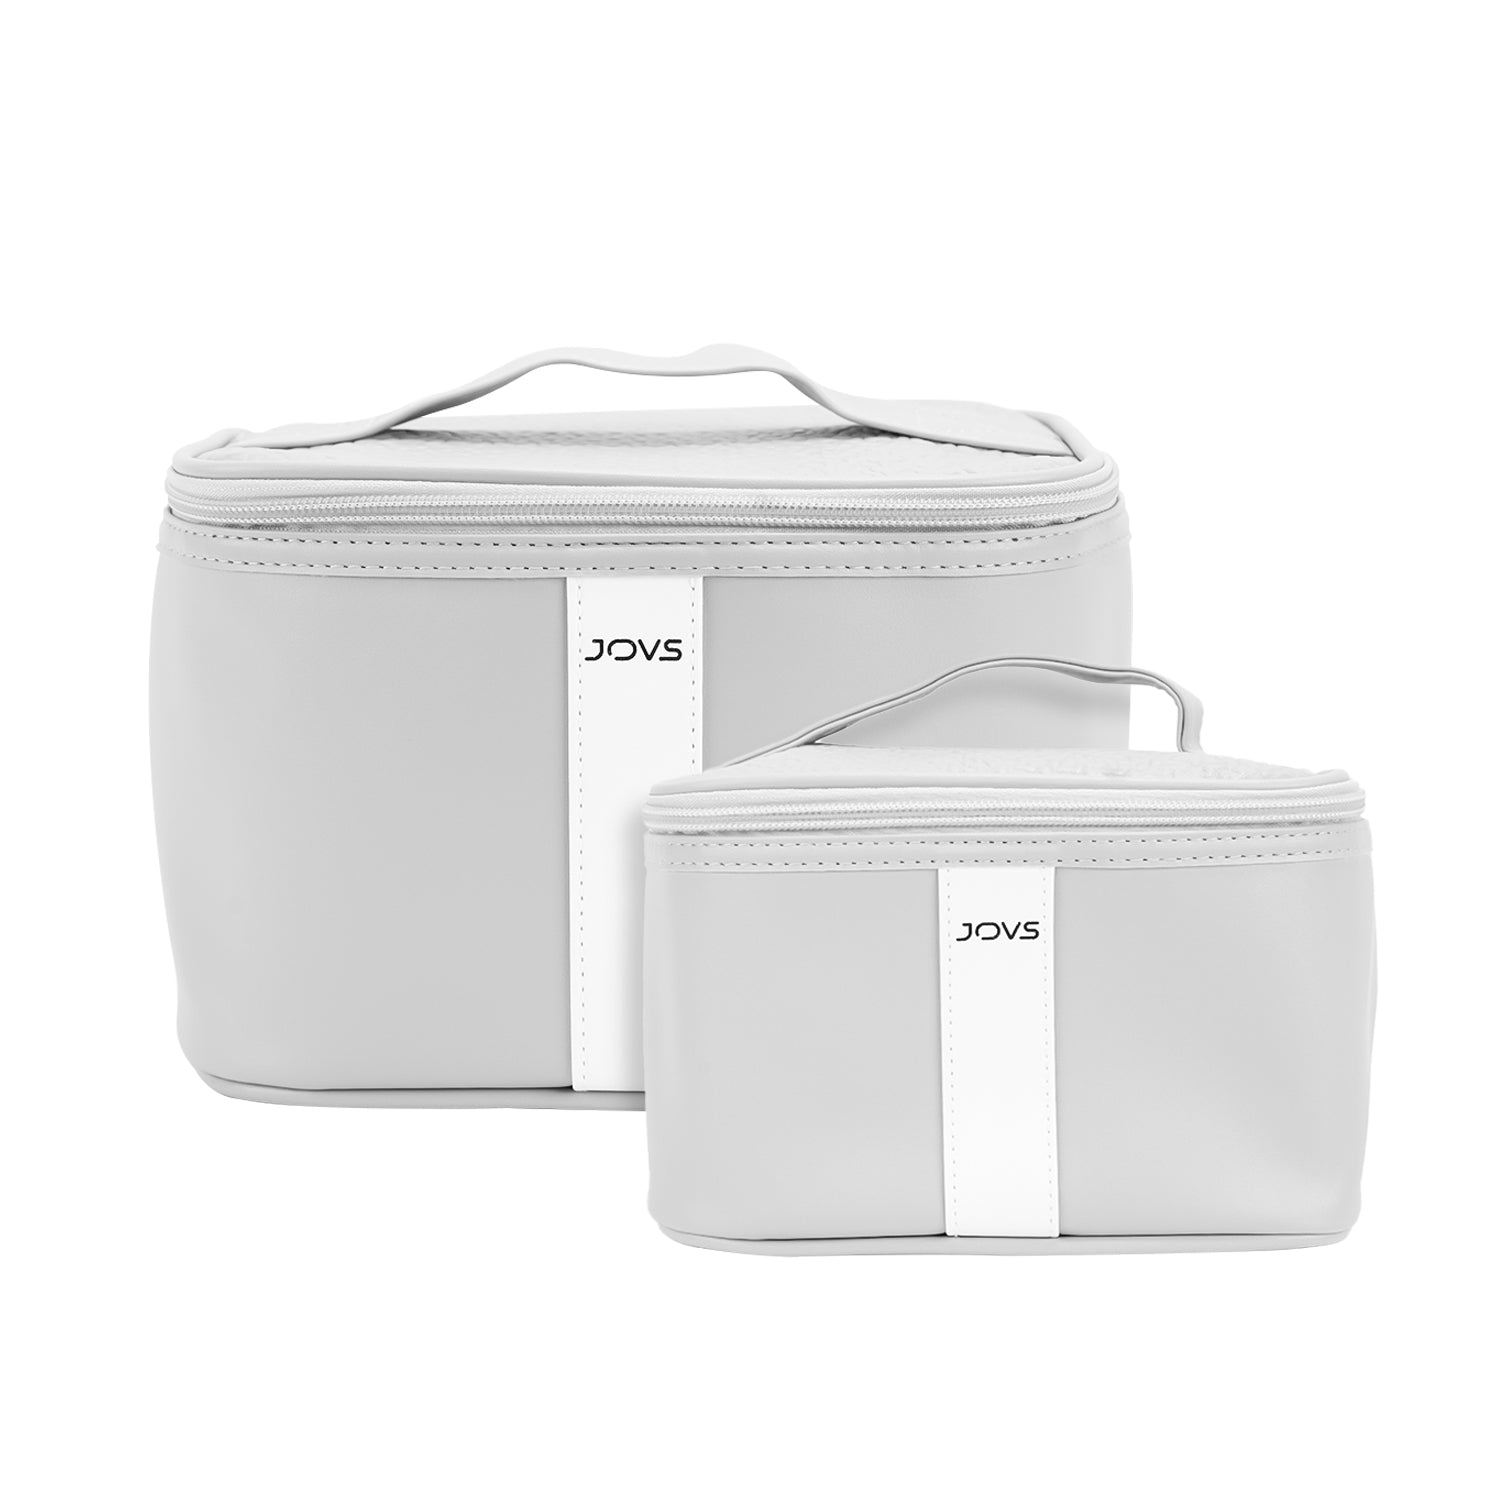 JOVS Cosmetic Bags Set in White with Handle and Brand Detailing for Organizing Skincare Products.